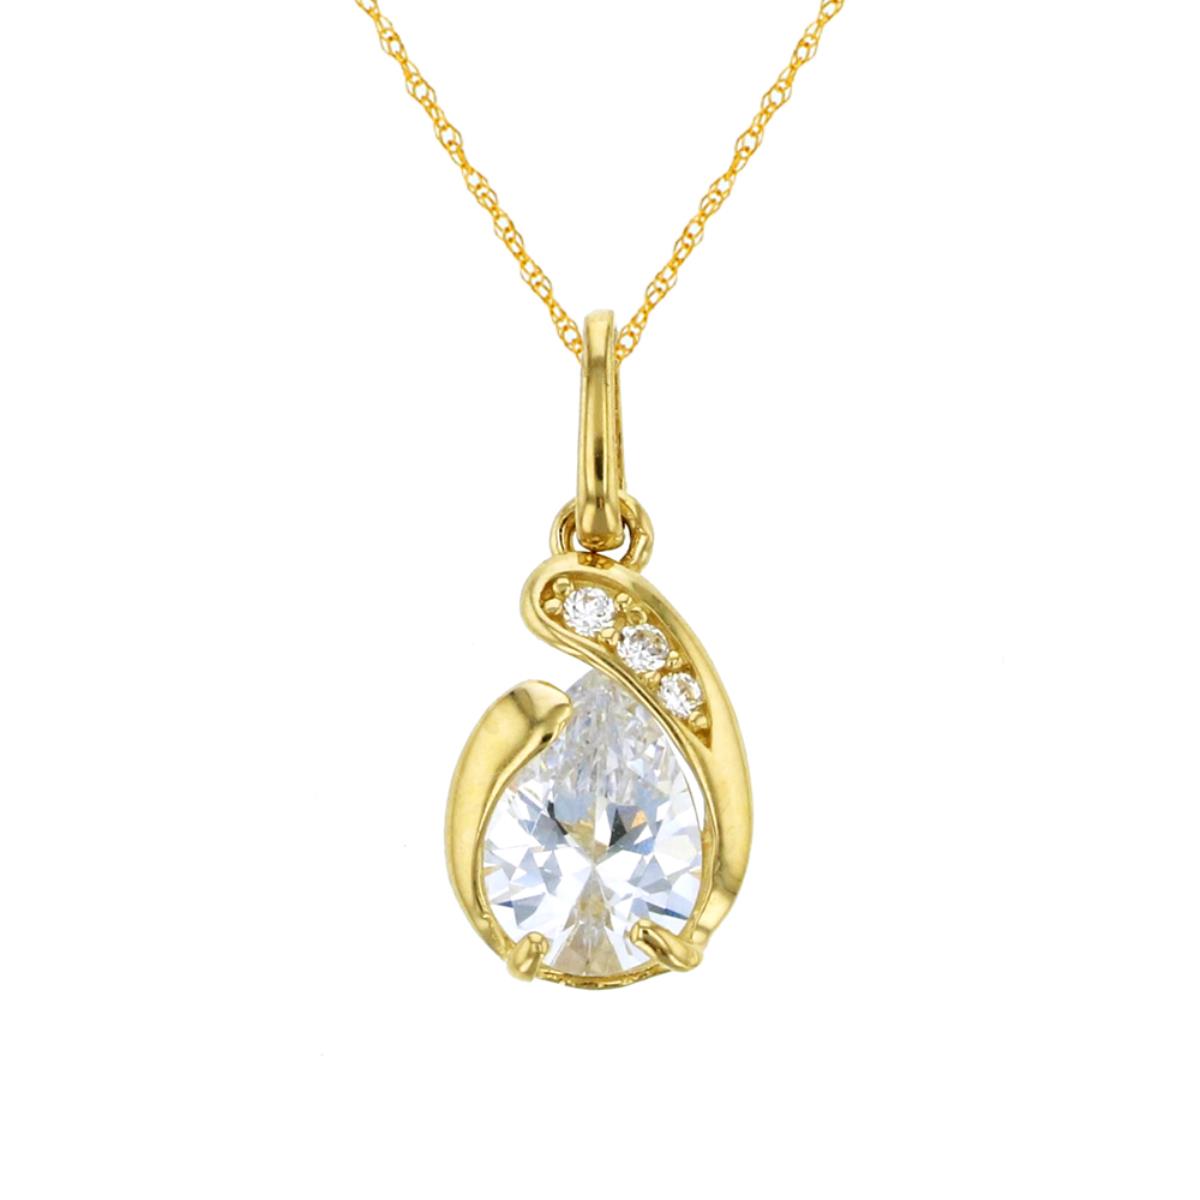 14K Yellow Gold 7x5mm Pear Cut CZ Dangling 18" Rope Chain Necklace